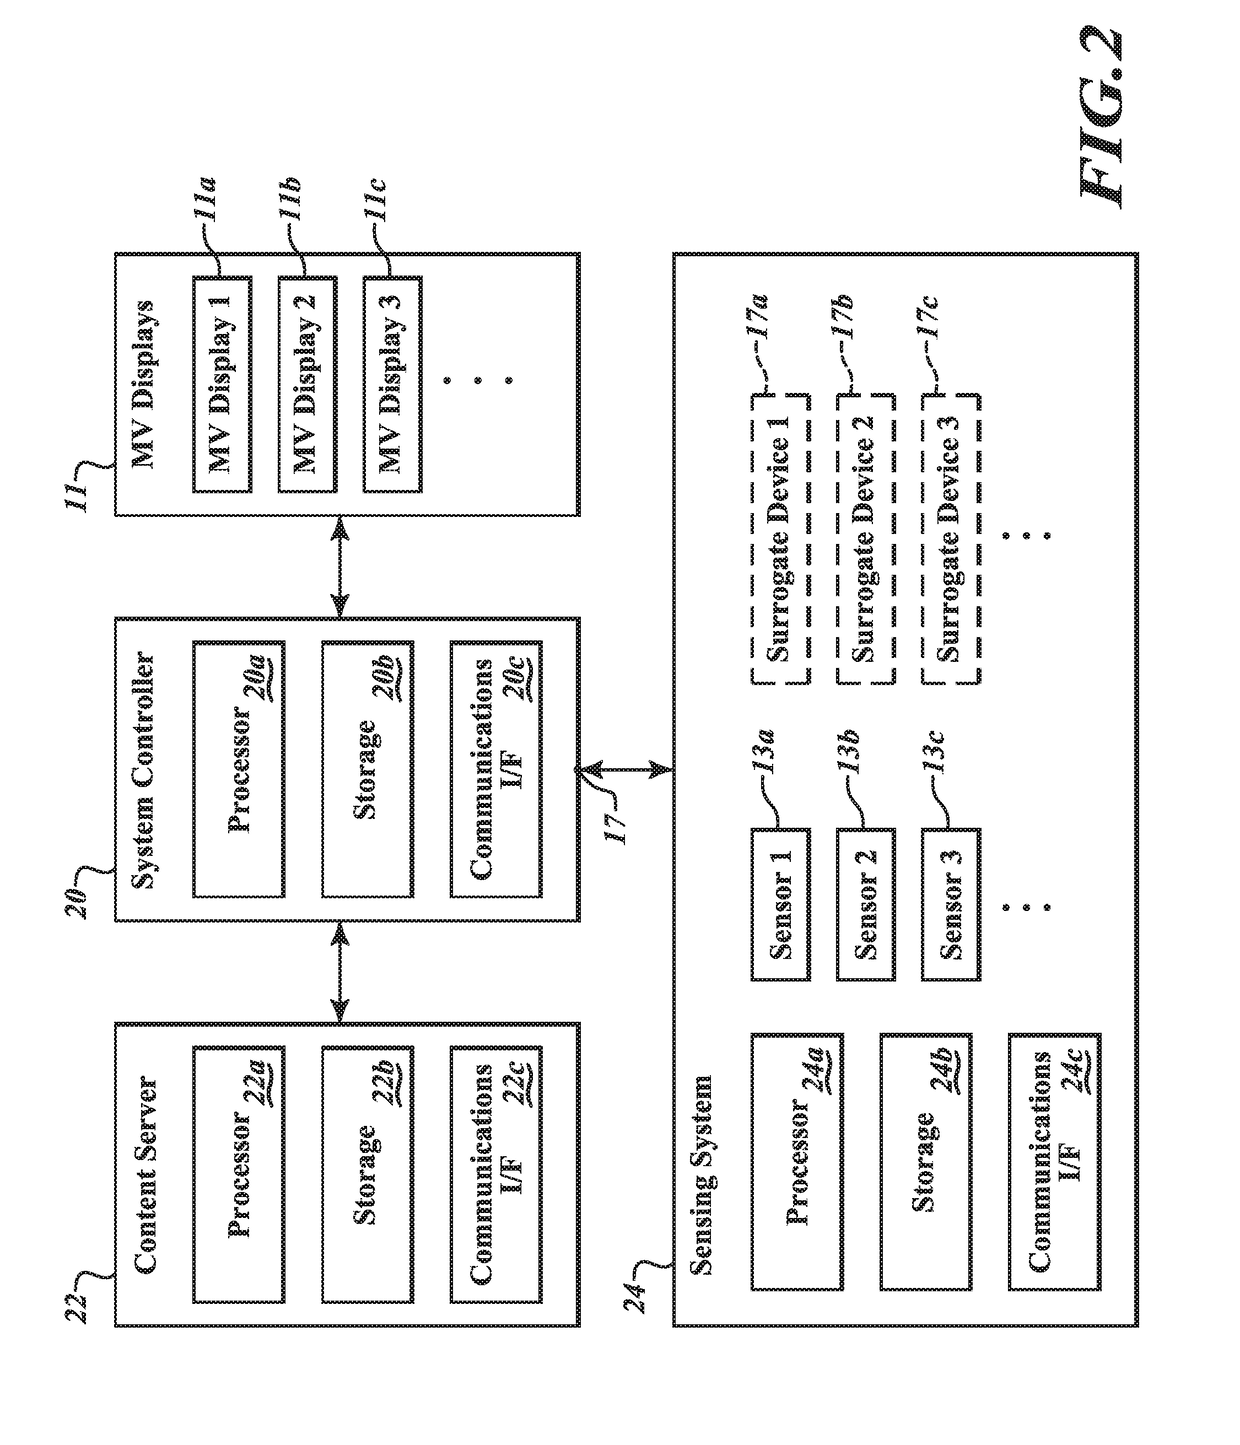 Multi-view advertising system and method